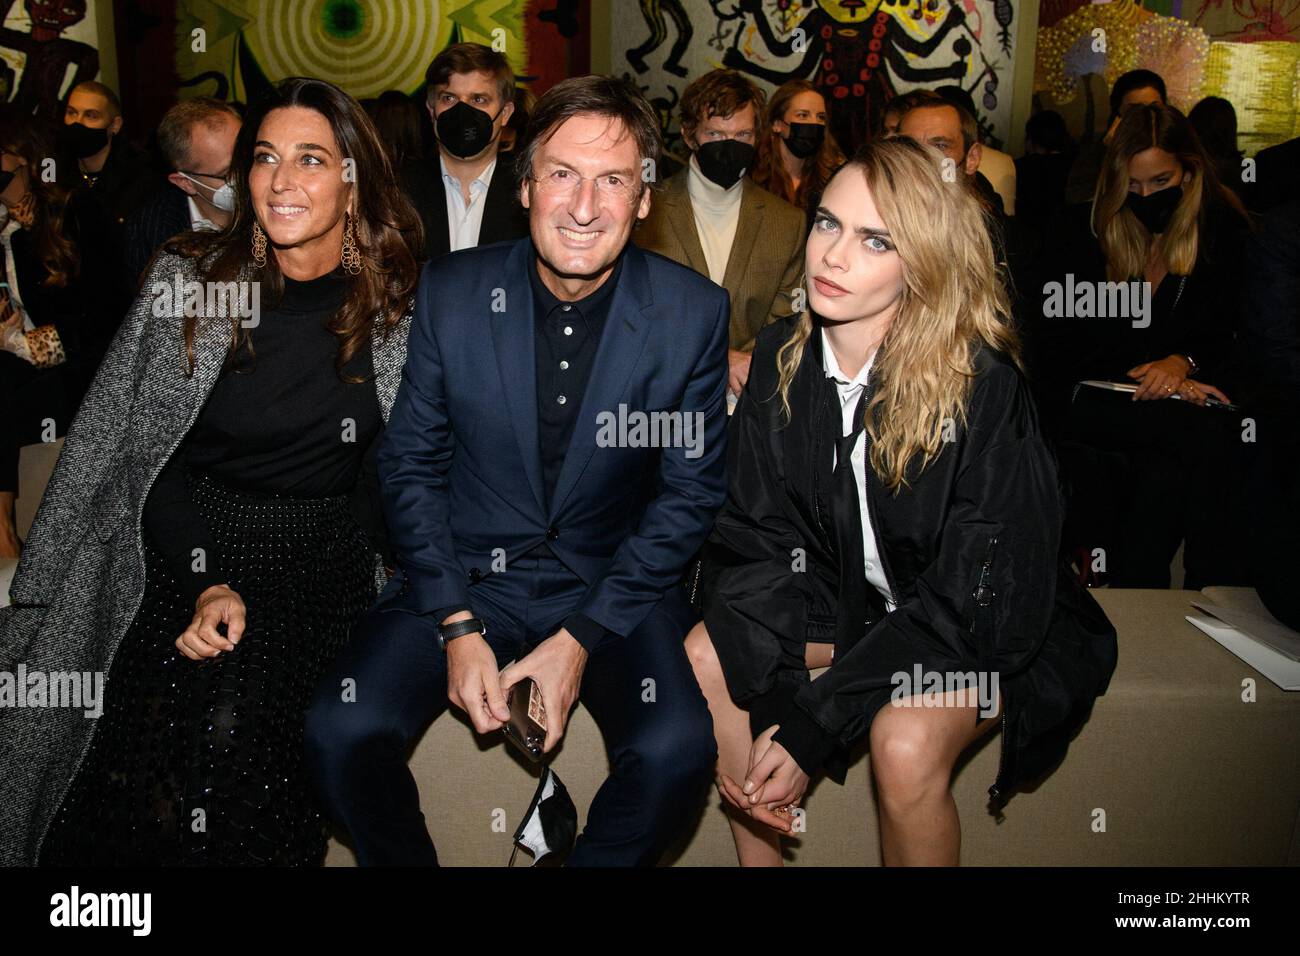 CEO of Dior Pietro Beccari with his wife Elisabetta attend the Photo  d'actualité - Getty Images